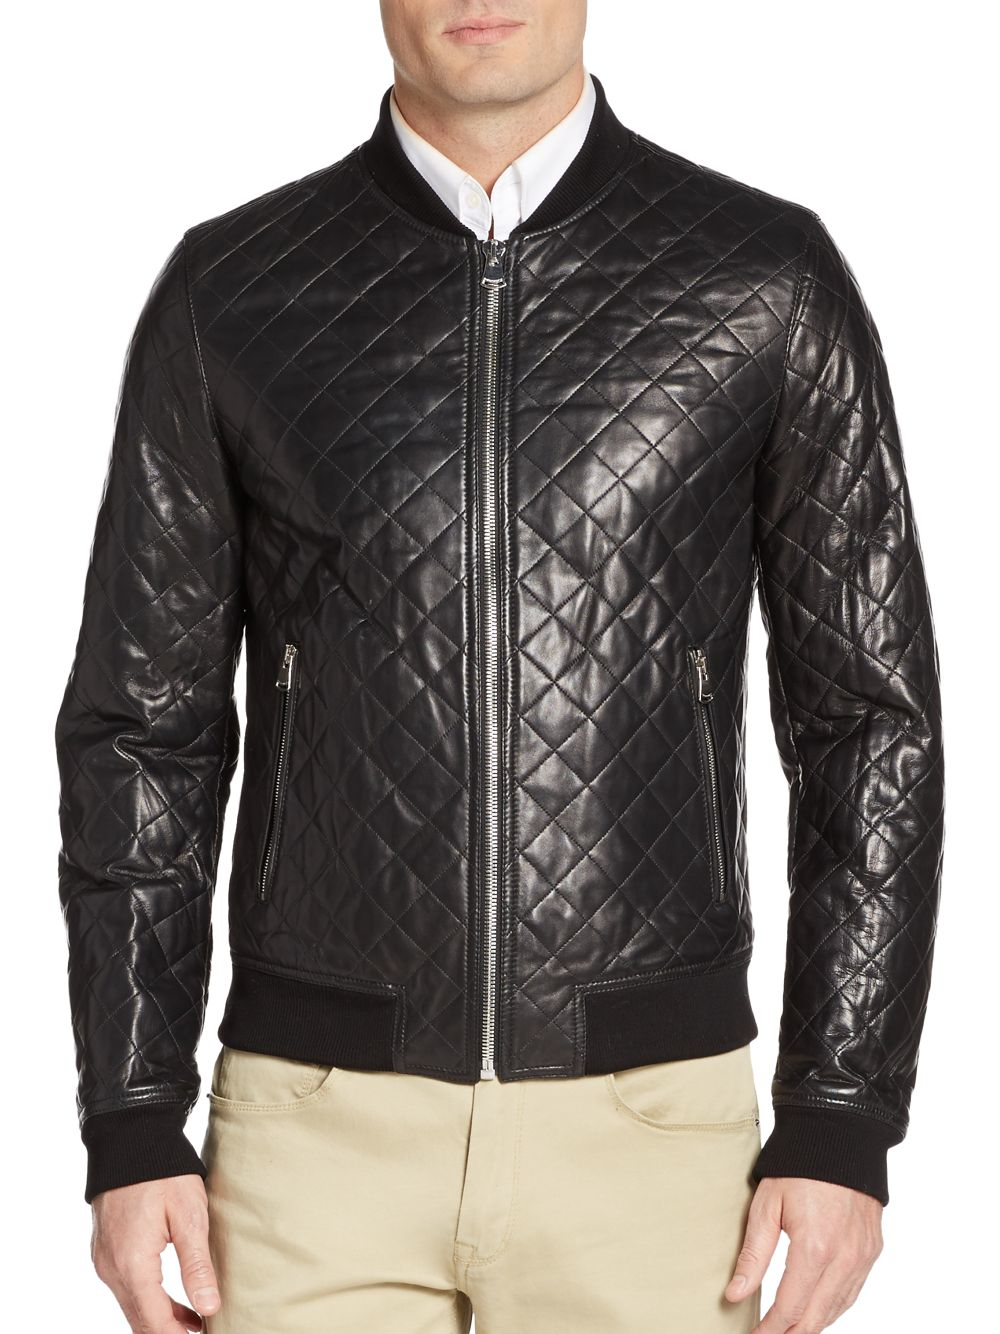 Dolce & Gabbana Leather Quilted Bomber Jacket in Black for Men - Lyst